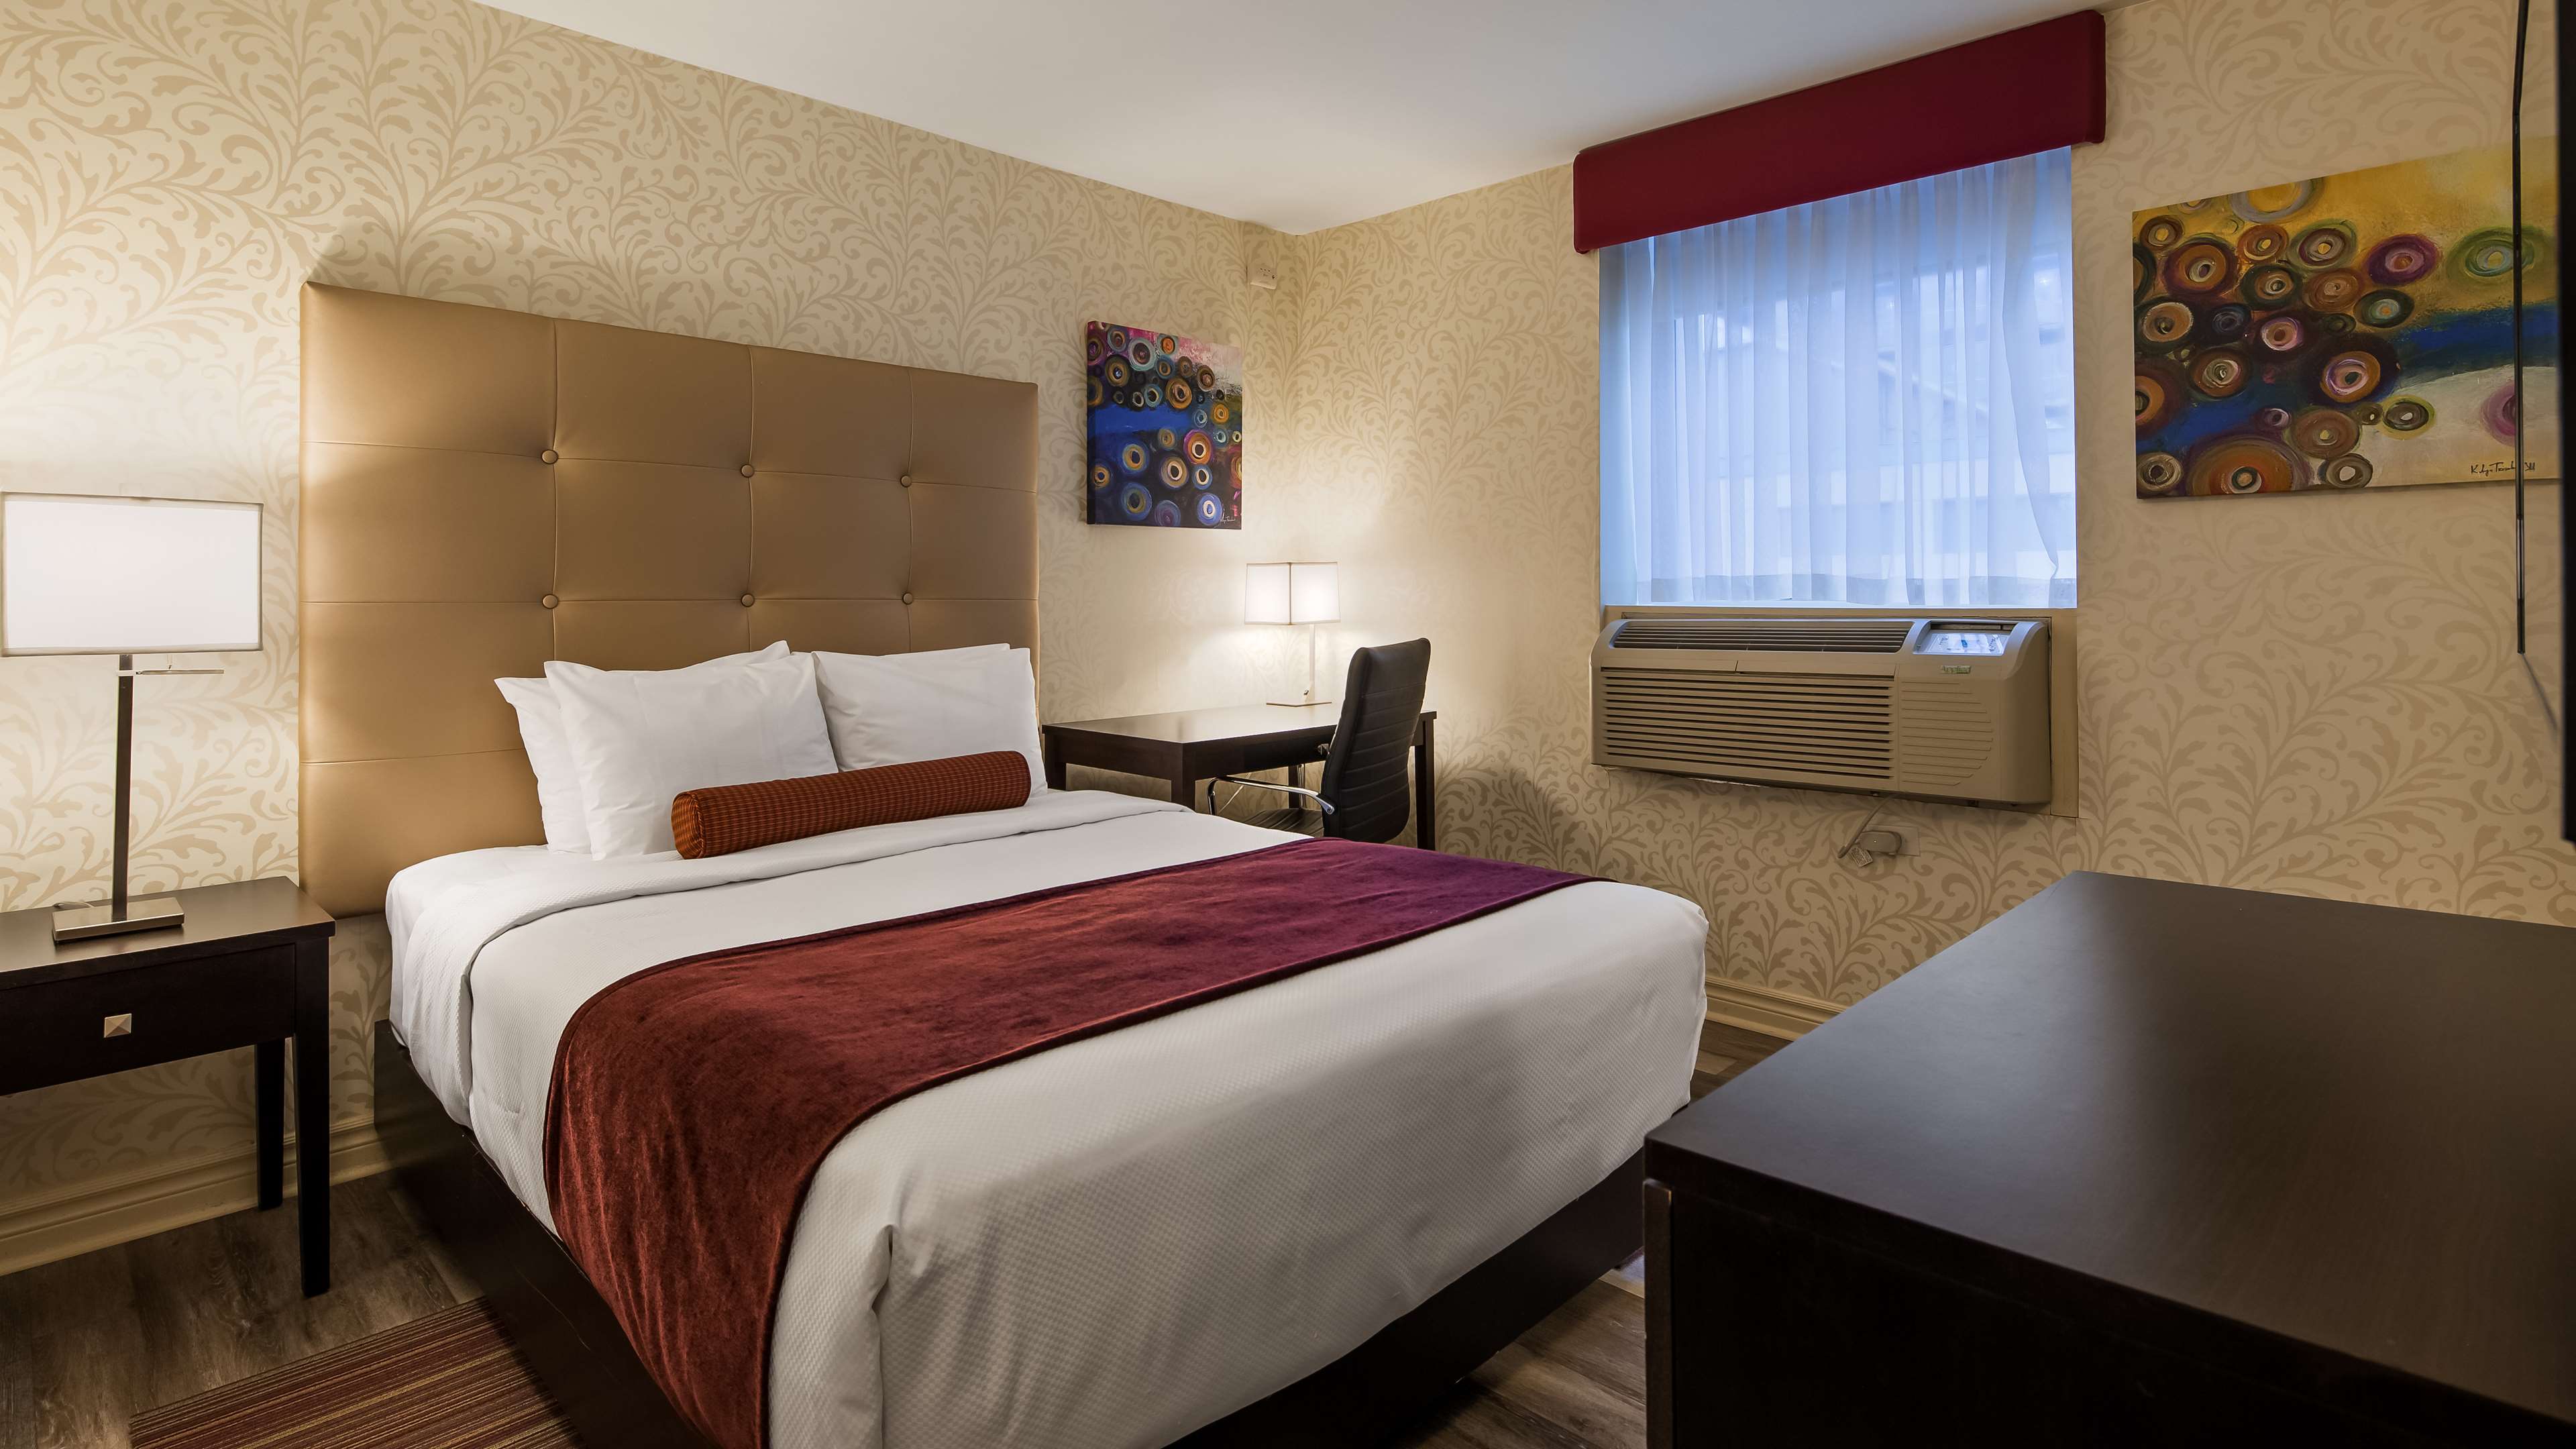 Queen Guest Room Best Western Plus Montreal Downtown-Hotel Europa Montreal (514)866-6492